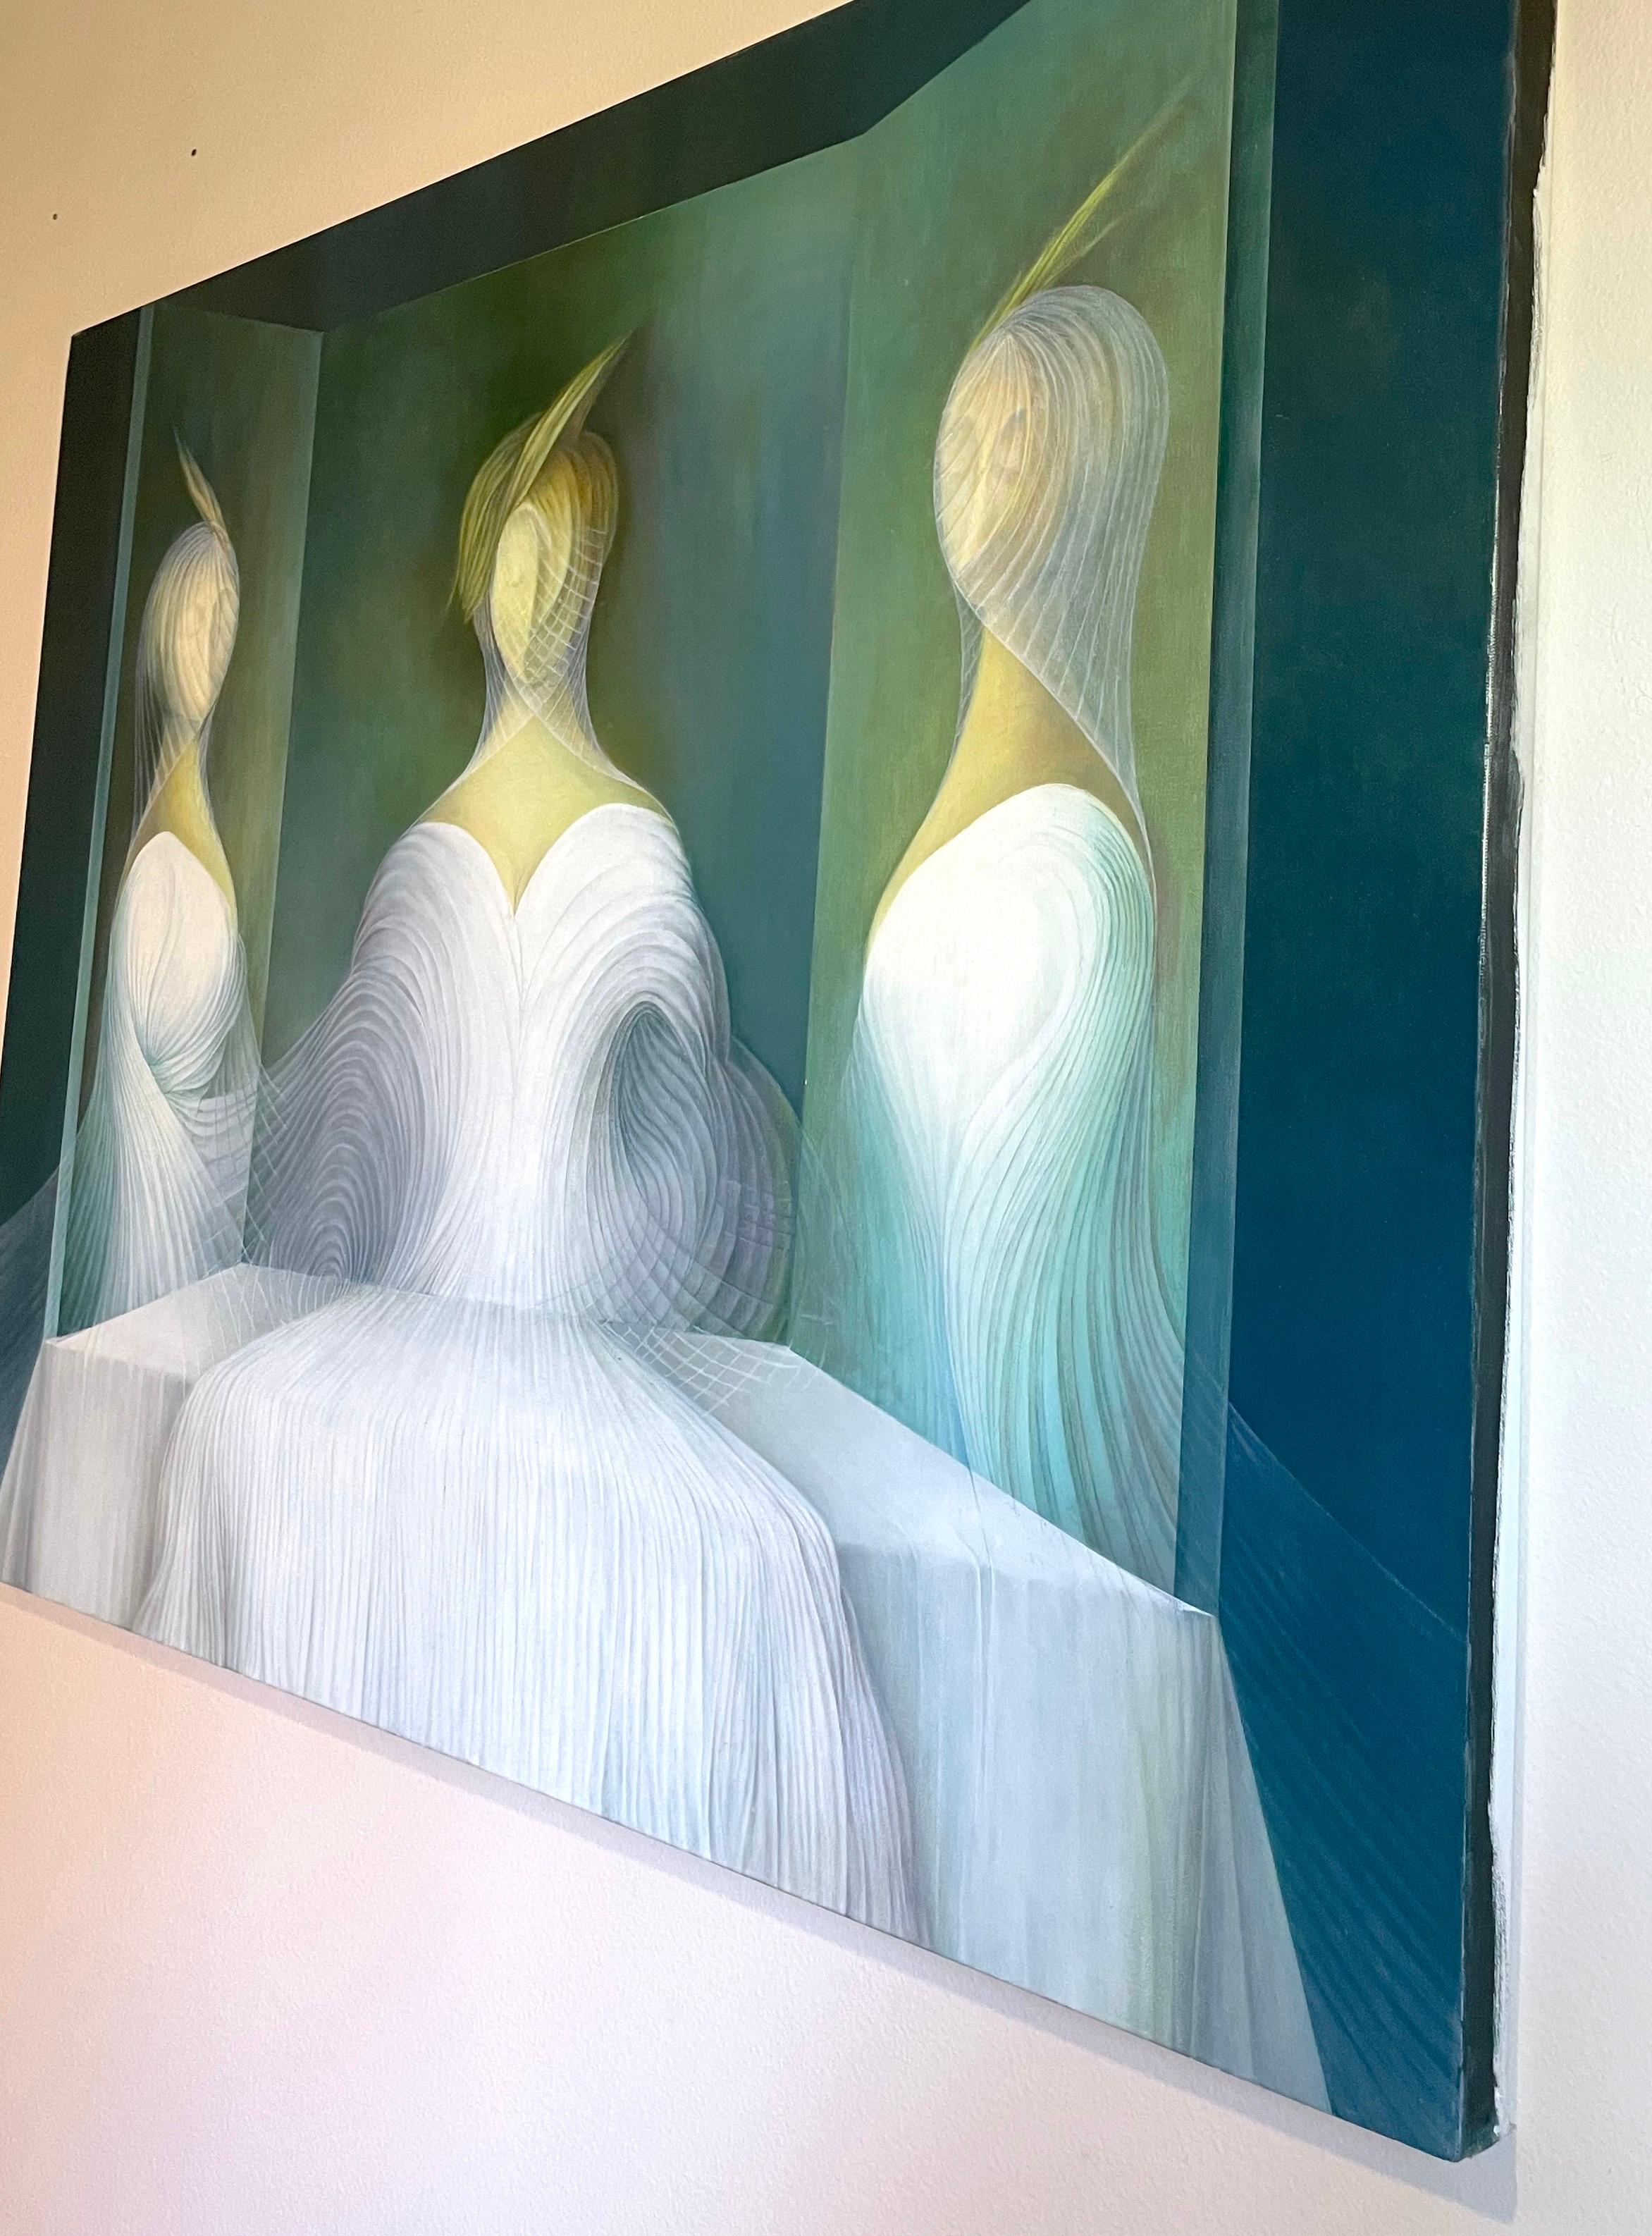 Artist: Vahagn Ghaltaghchyan
Work: Original oil painting, handmade artwork, one of a kind 
Medium: Oil on Canvas
Style: Abstract Art
Year: 2023
Title: Reflection
Size: 36